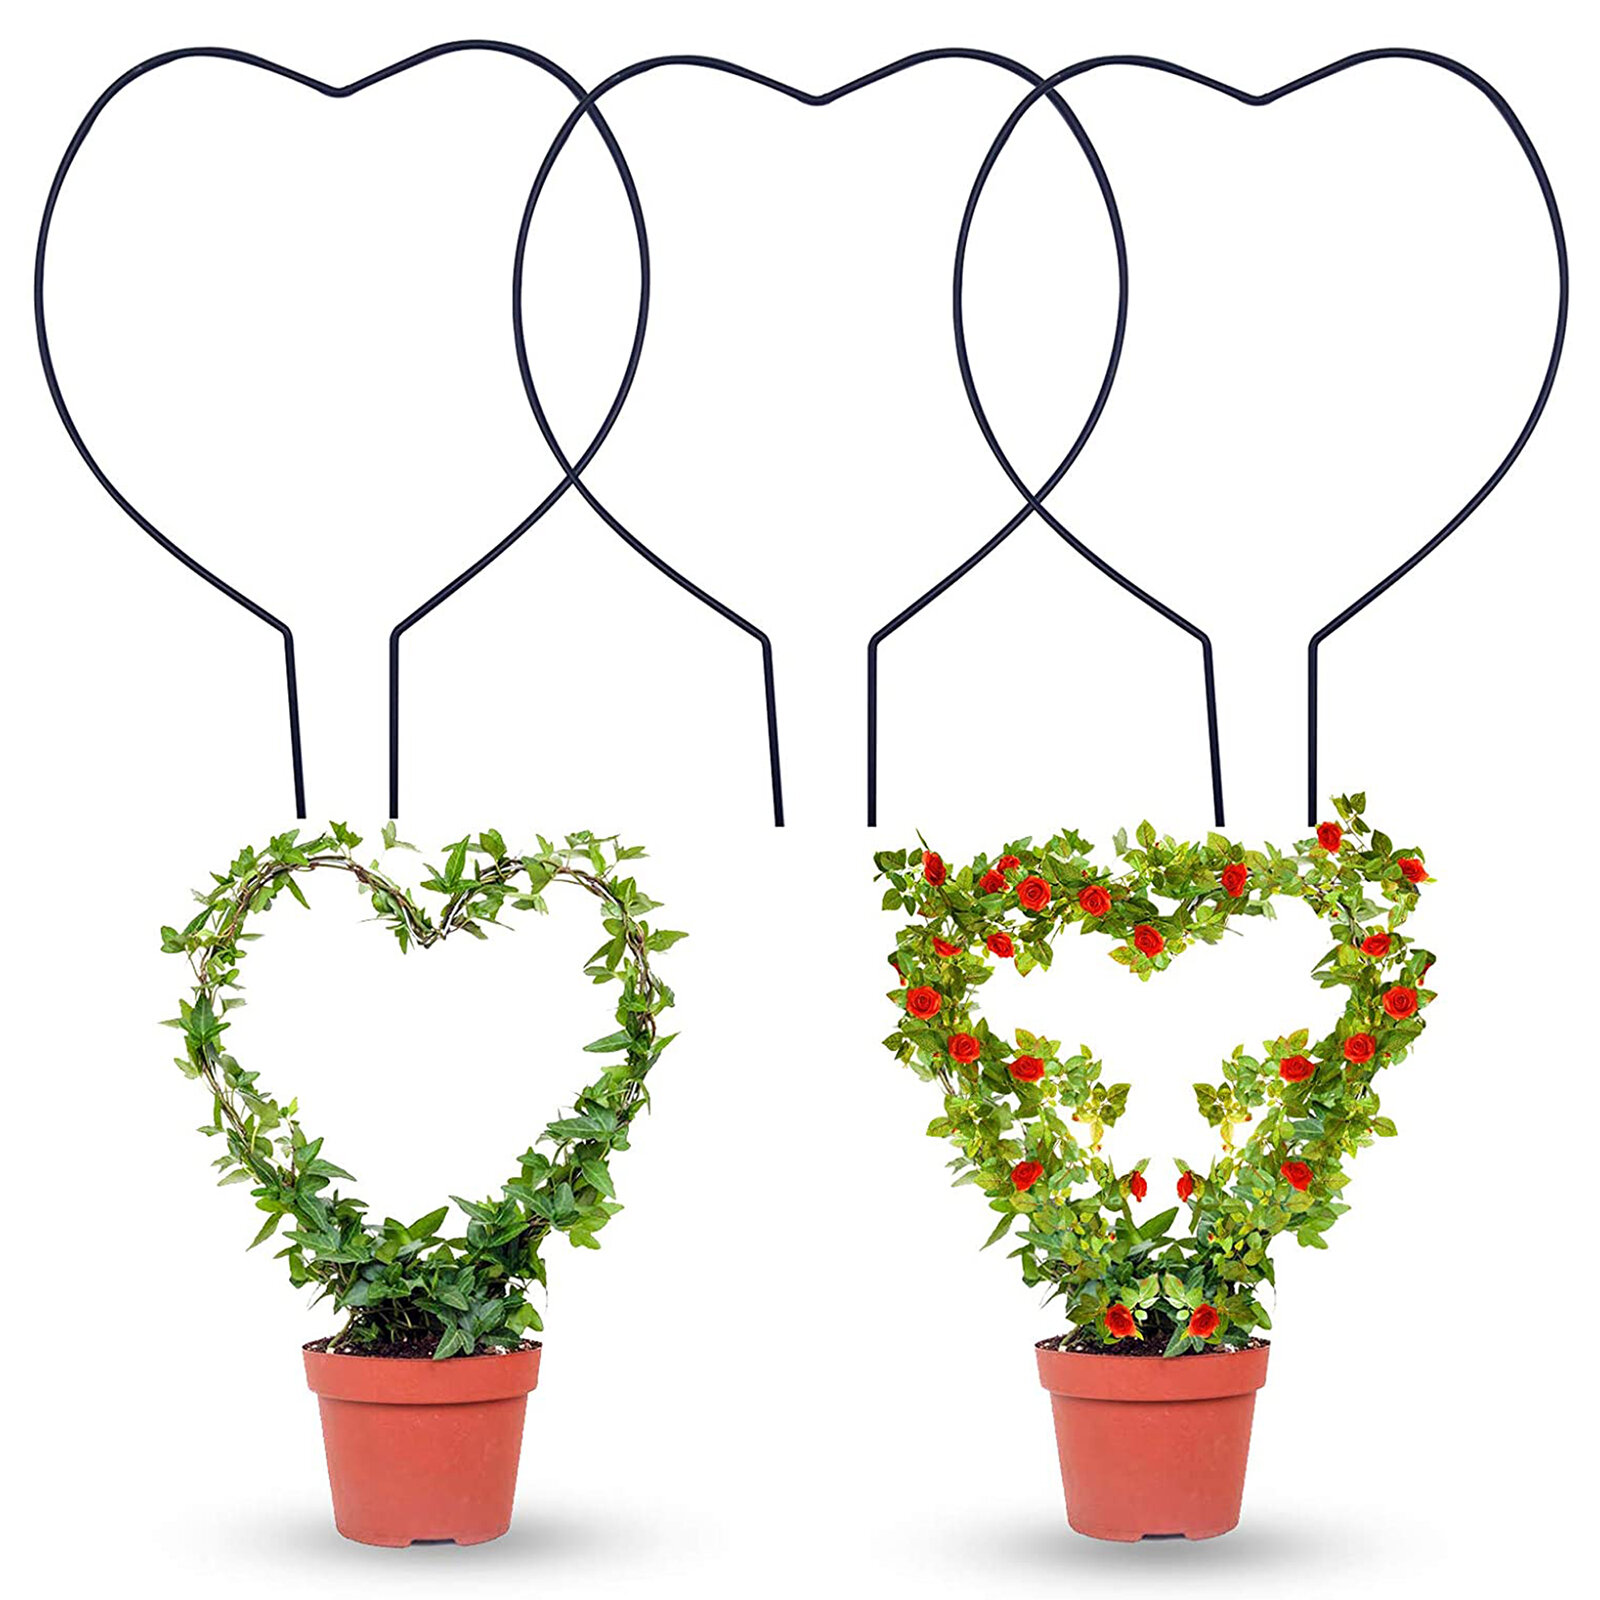 Garden Metal Trellis for Climbing Outdoor Plants Small Garden Trellis Rust Proof Vine Support Wire Decorative Potted Plant Climbing Heart Shaped Holder Rack Pack of 2 Heart 